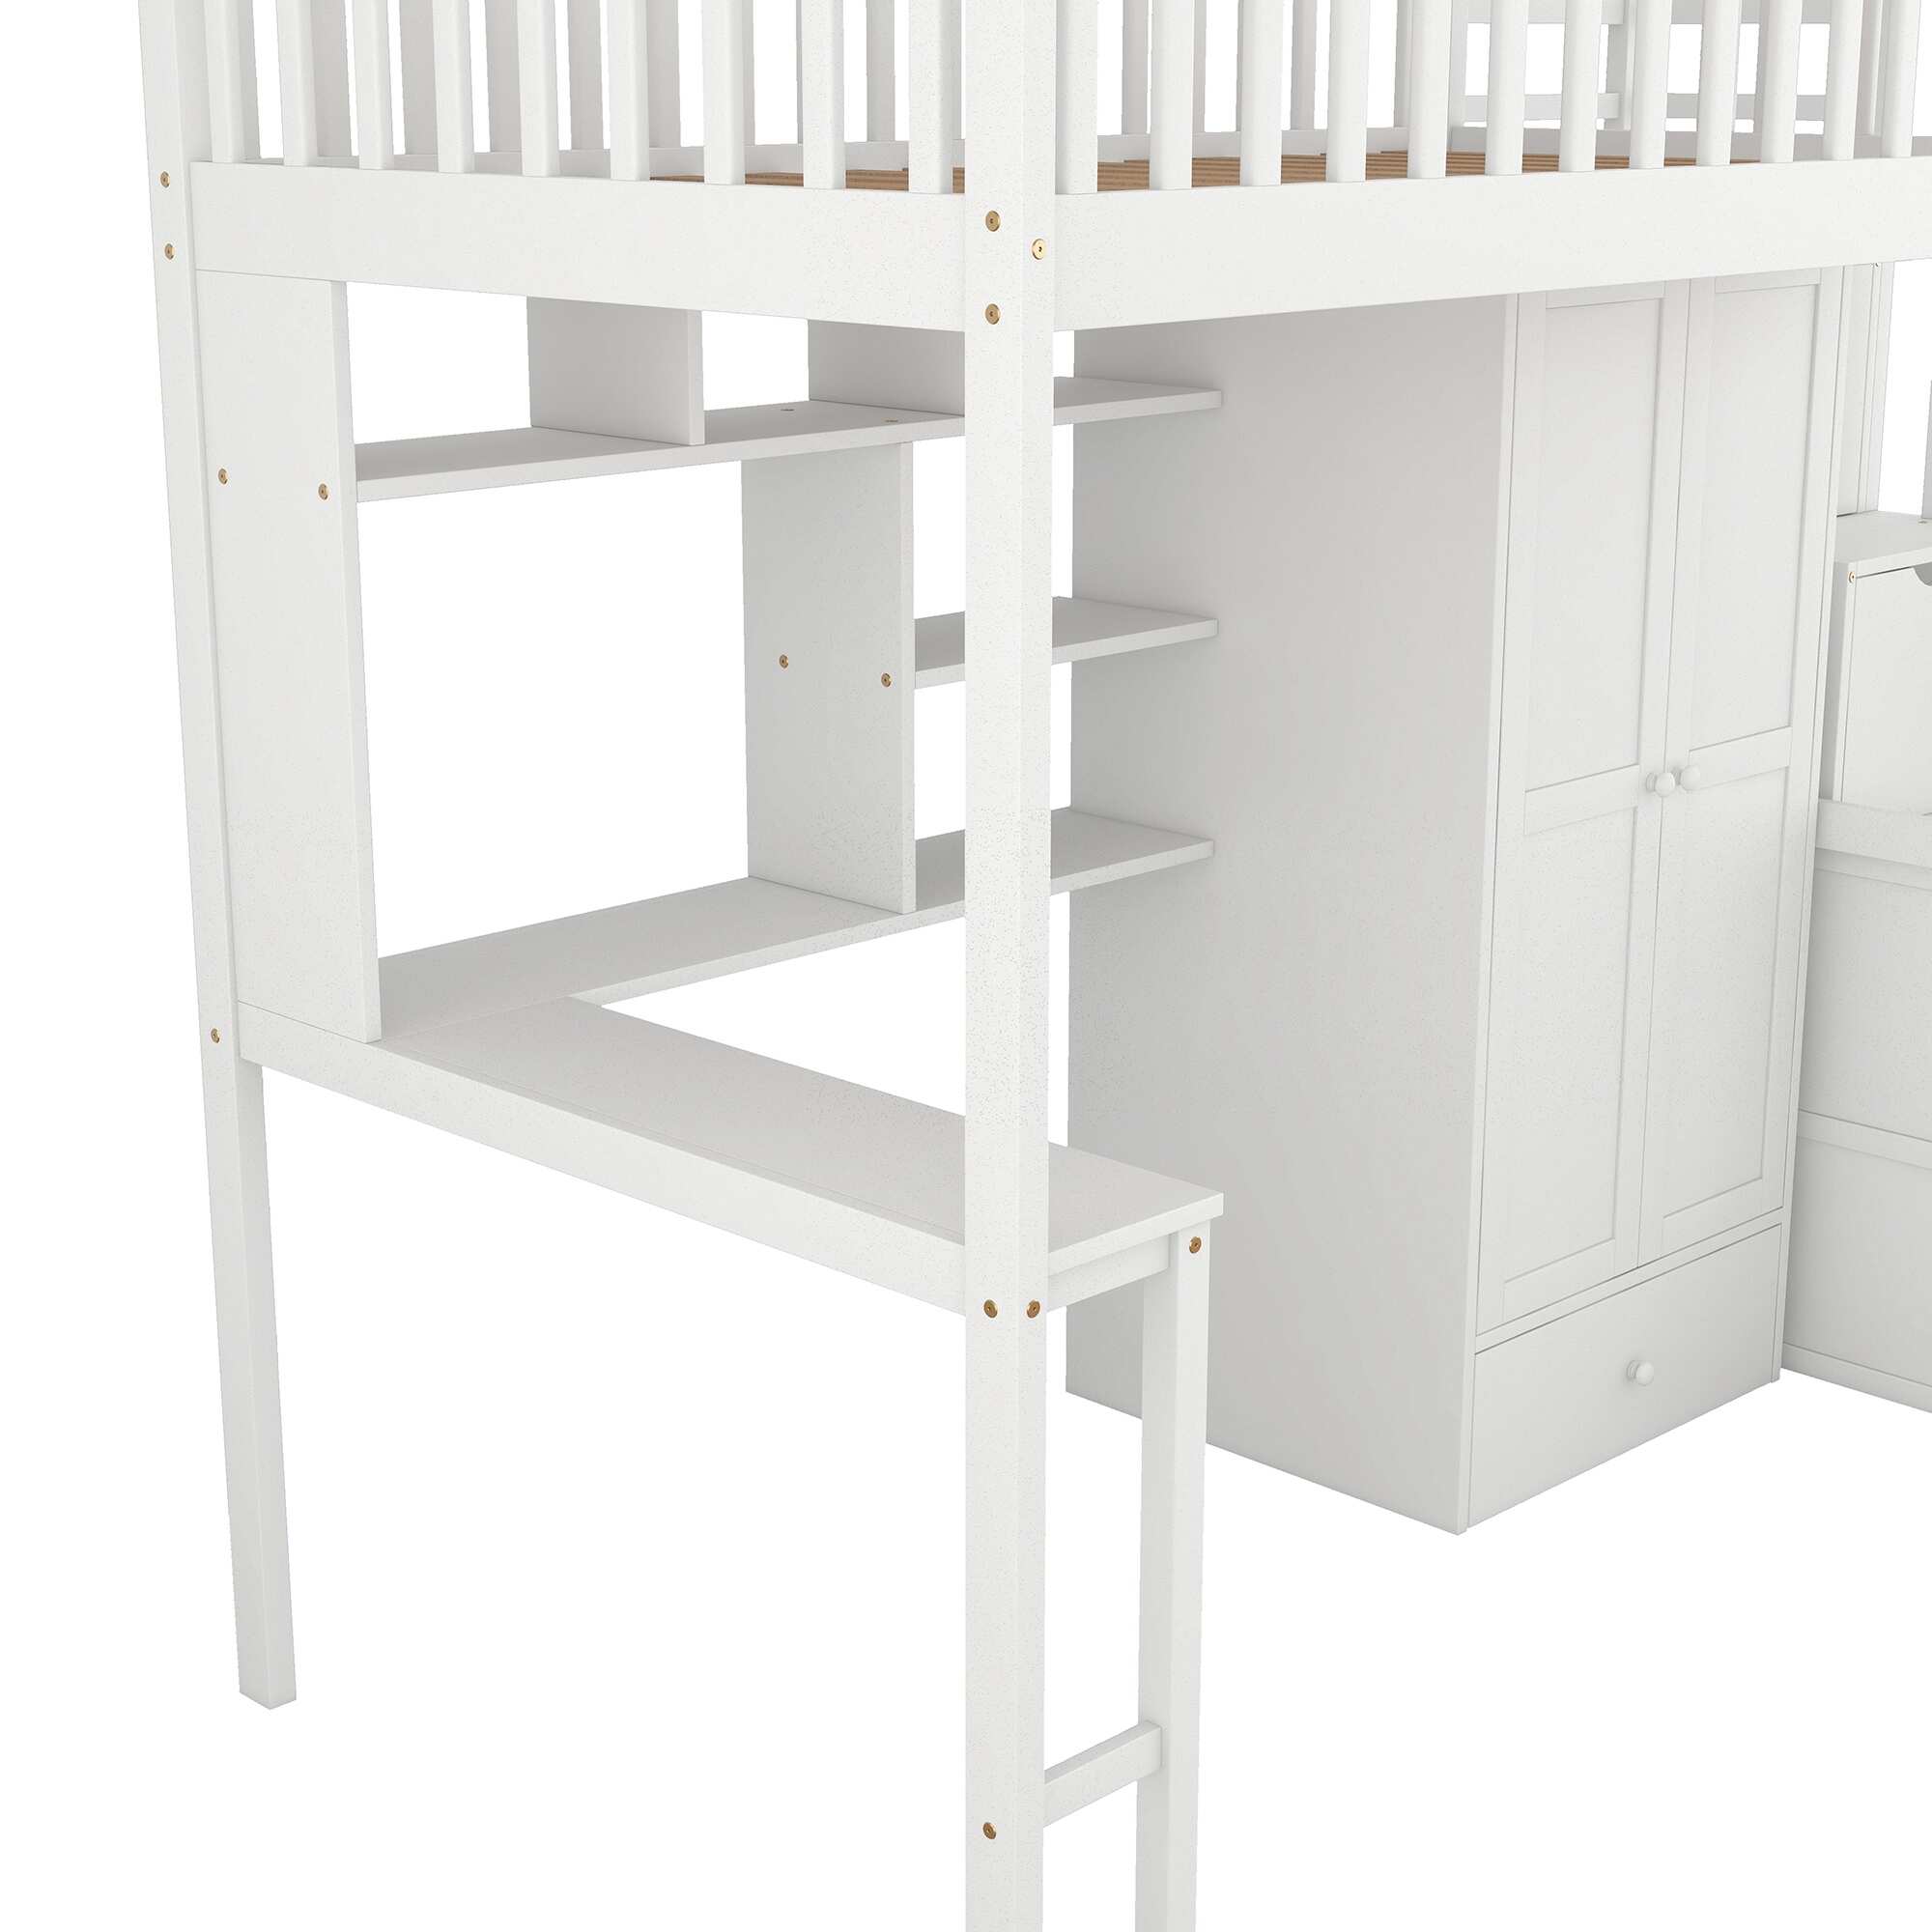 Twin Size Multifunctional Loft Bed with Stairs Storage, Built-in Desk, Wardrobe, Drawers and Bookshelf - Gray